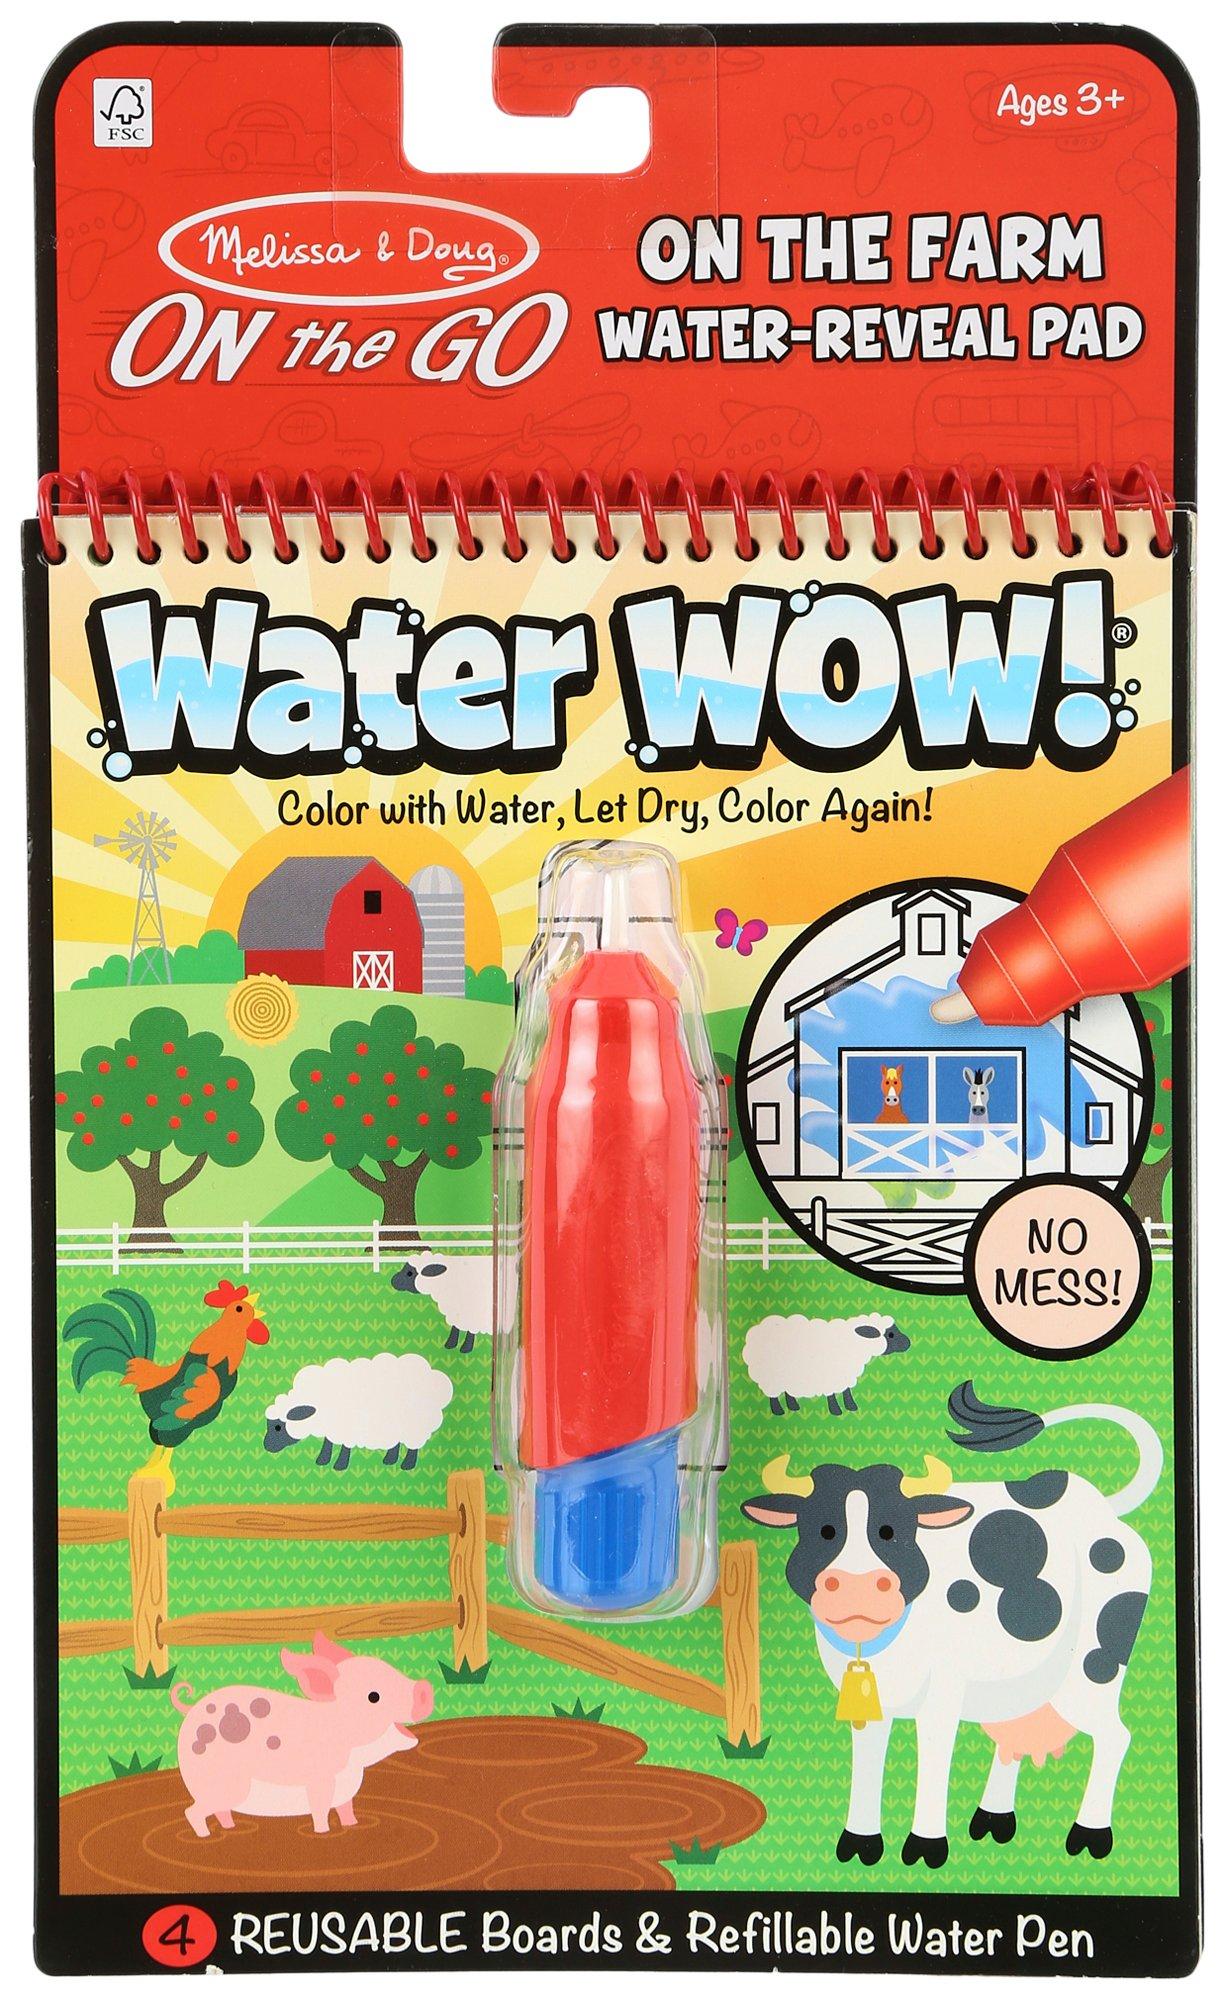 On the Farm Water Reveal Pad